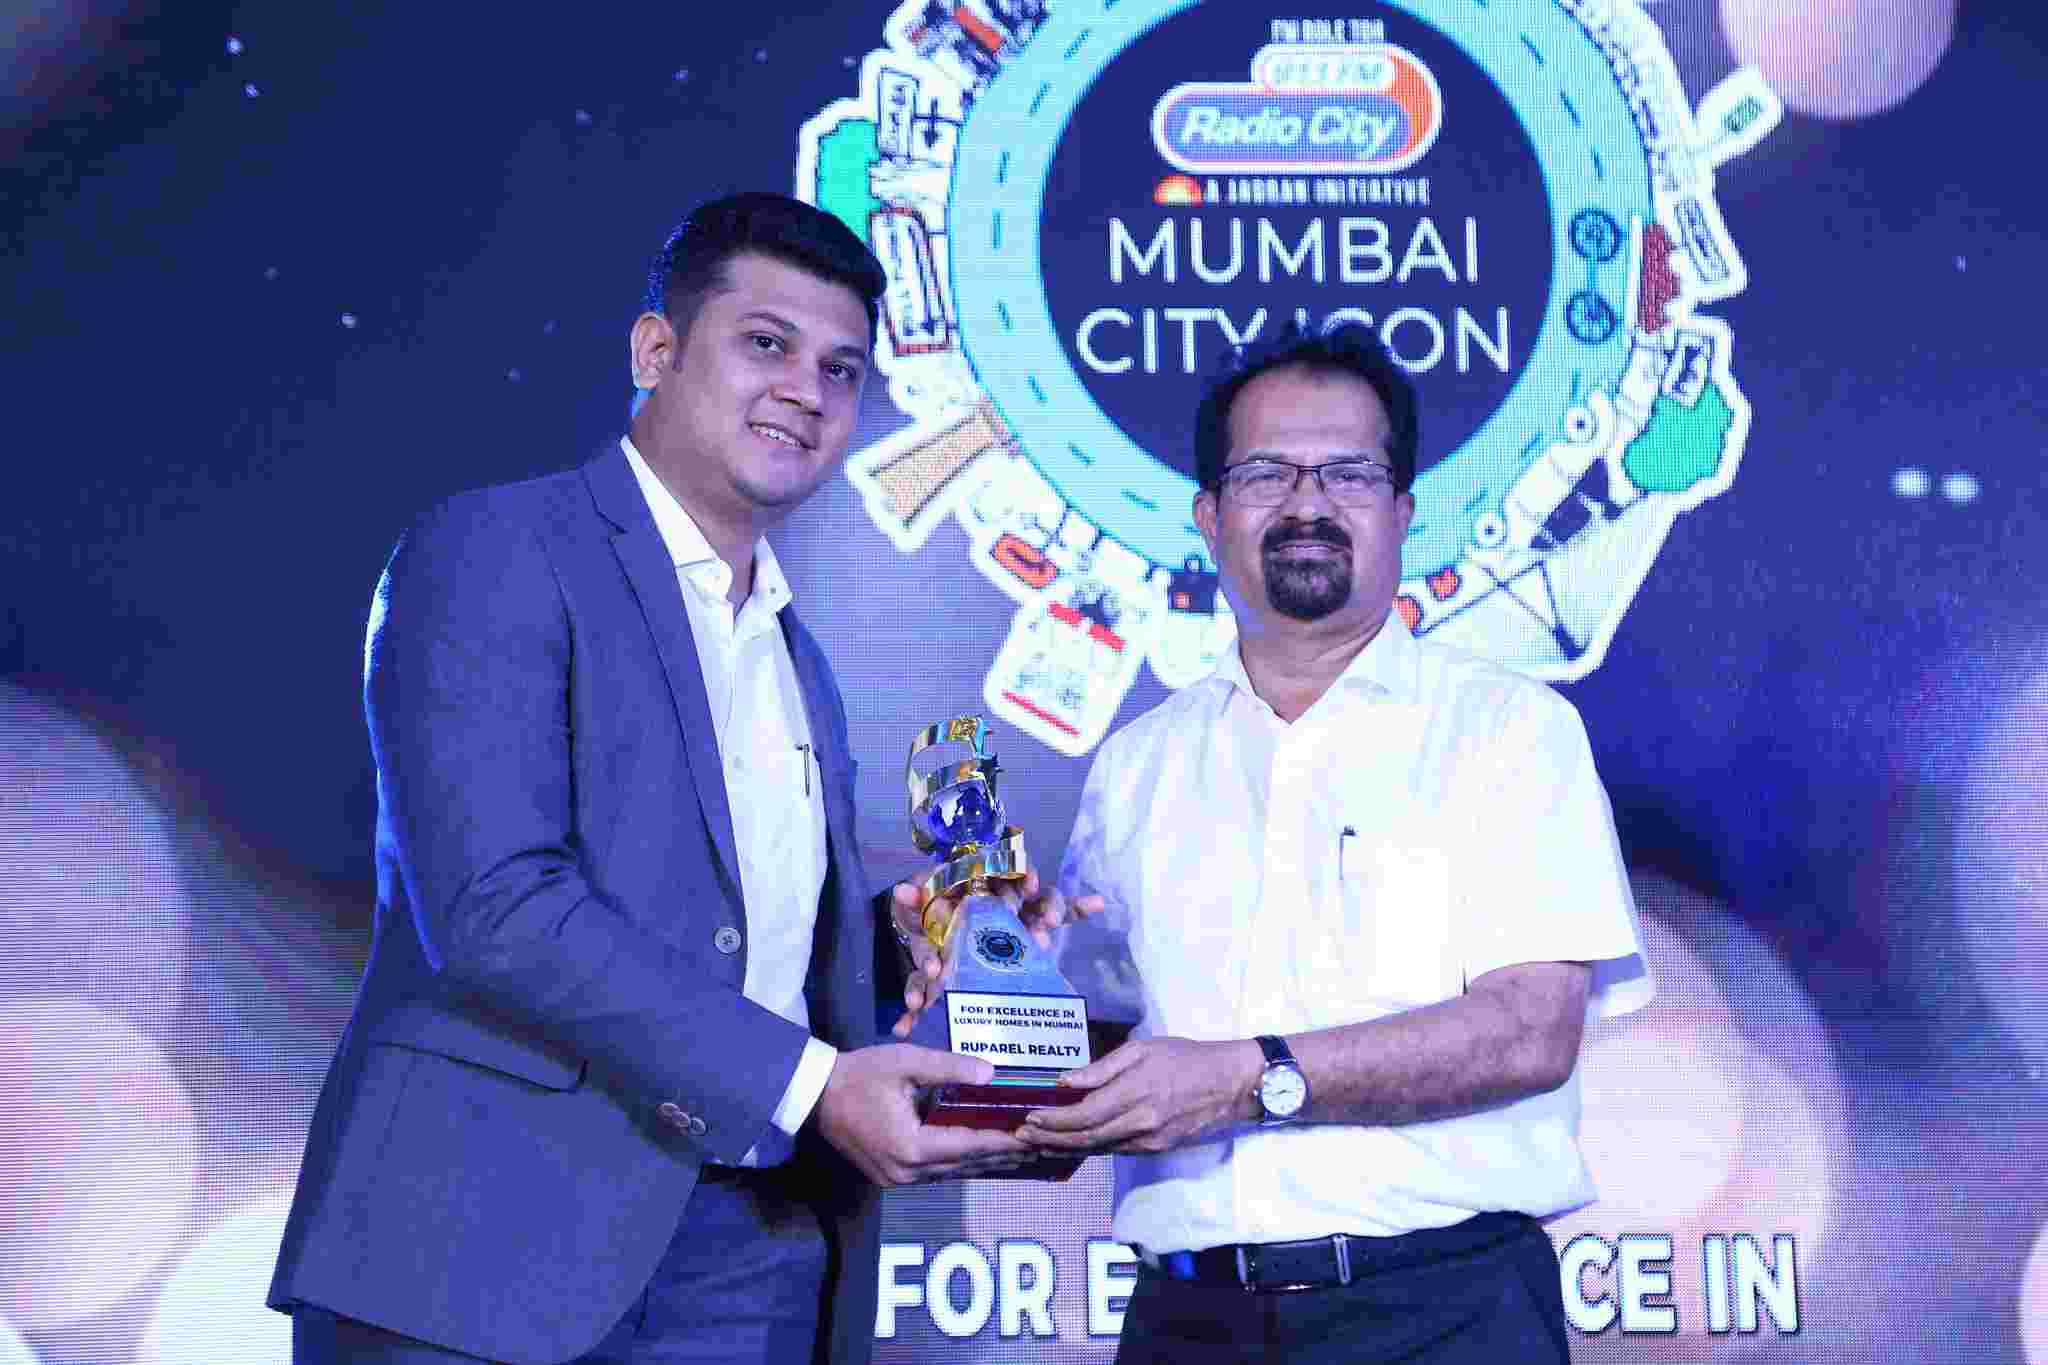 Ruparel realty awarded Mumbai City Icon for Excellence of Luxury Homes 2018 Update